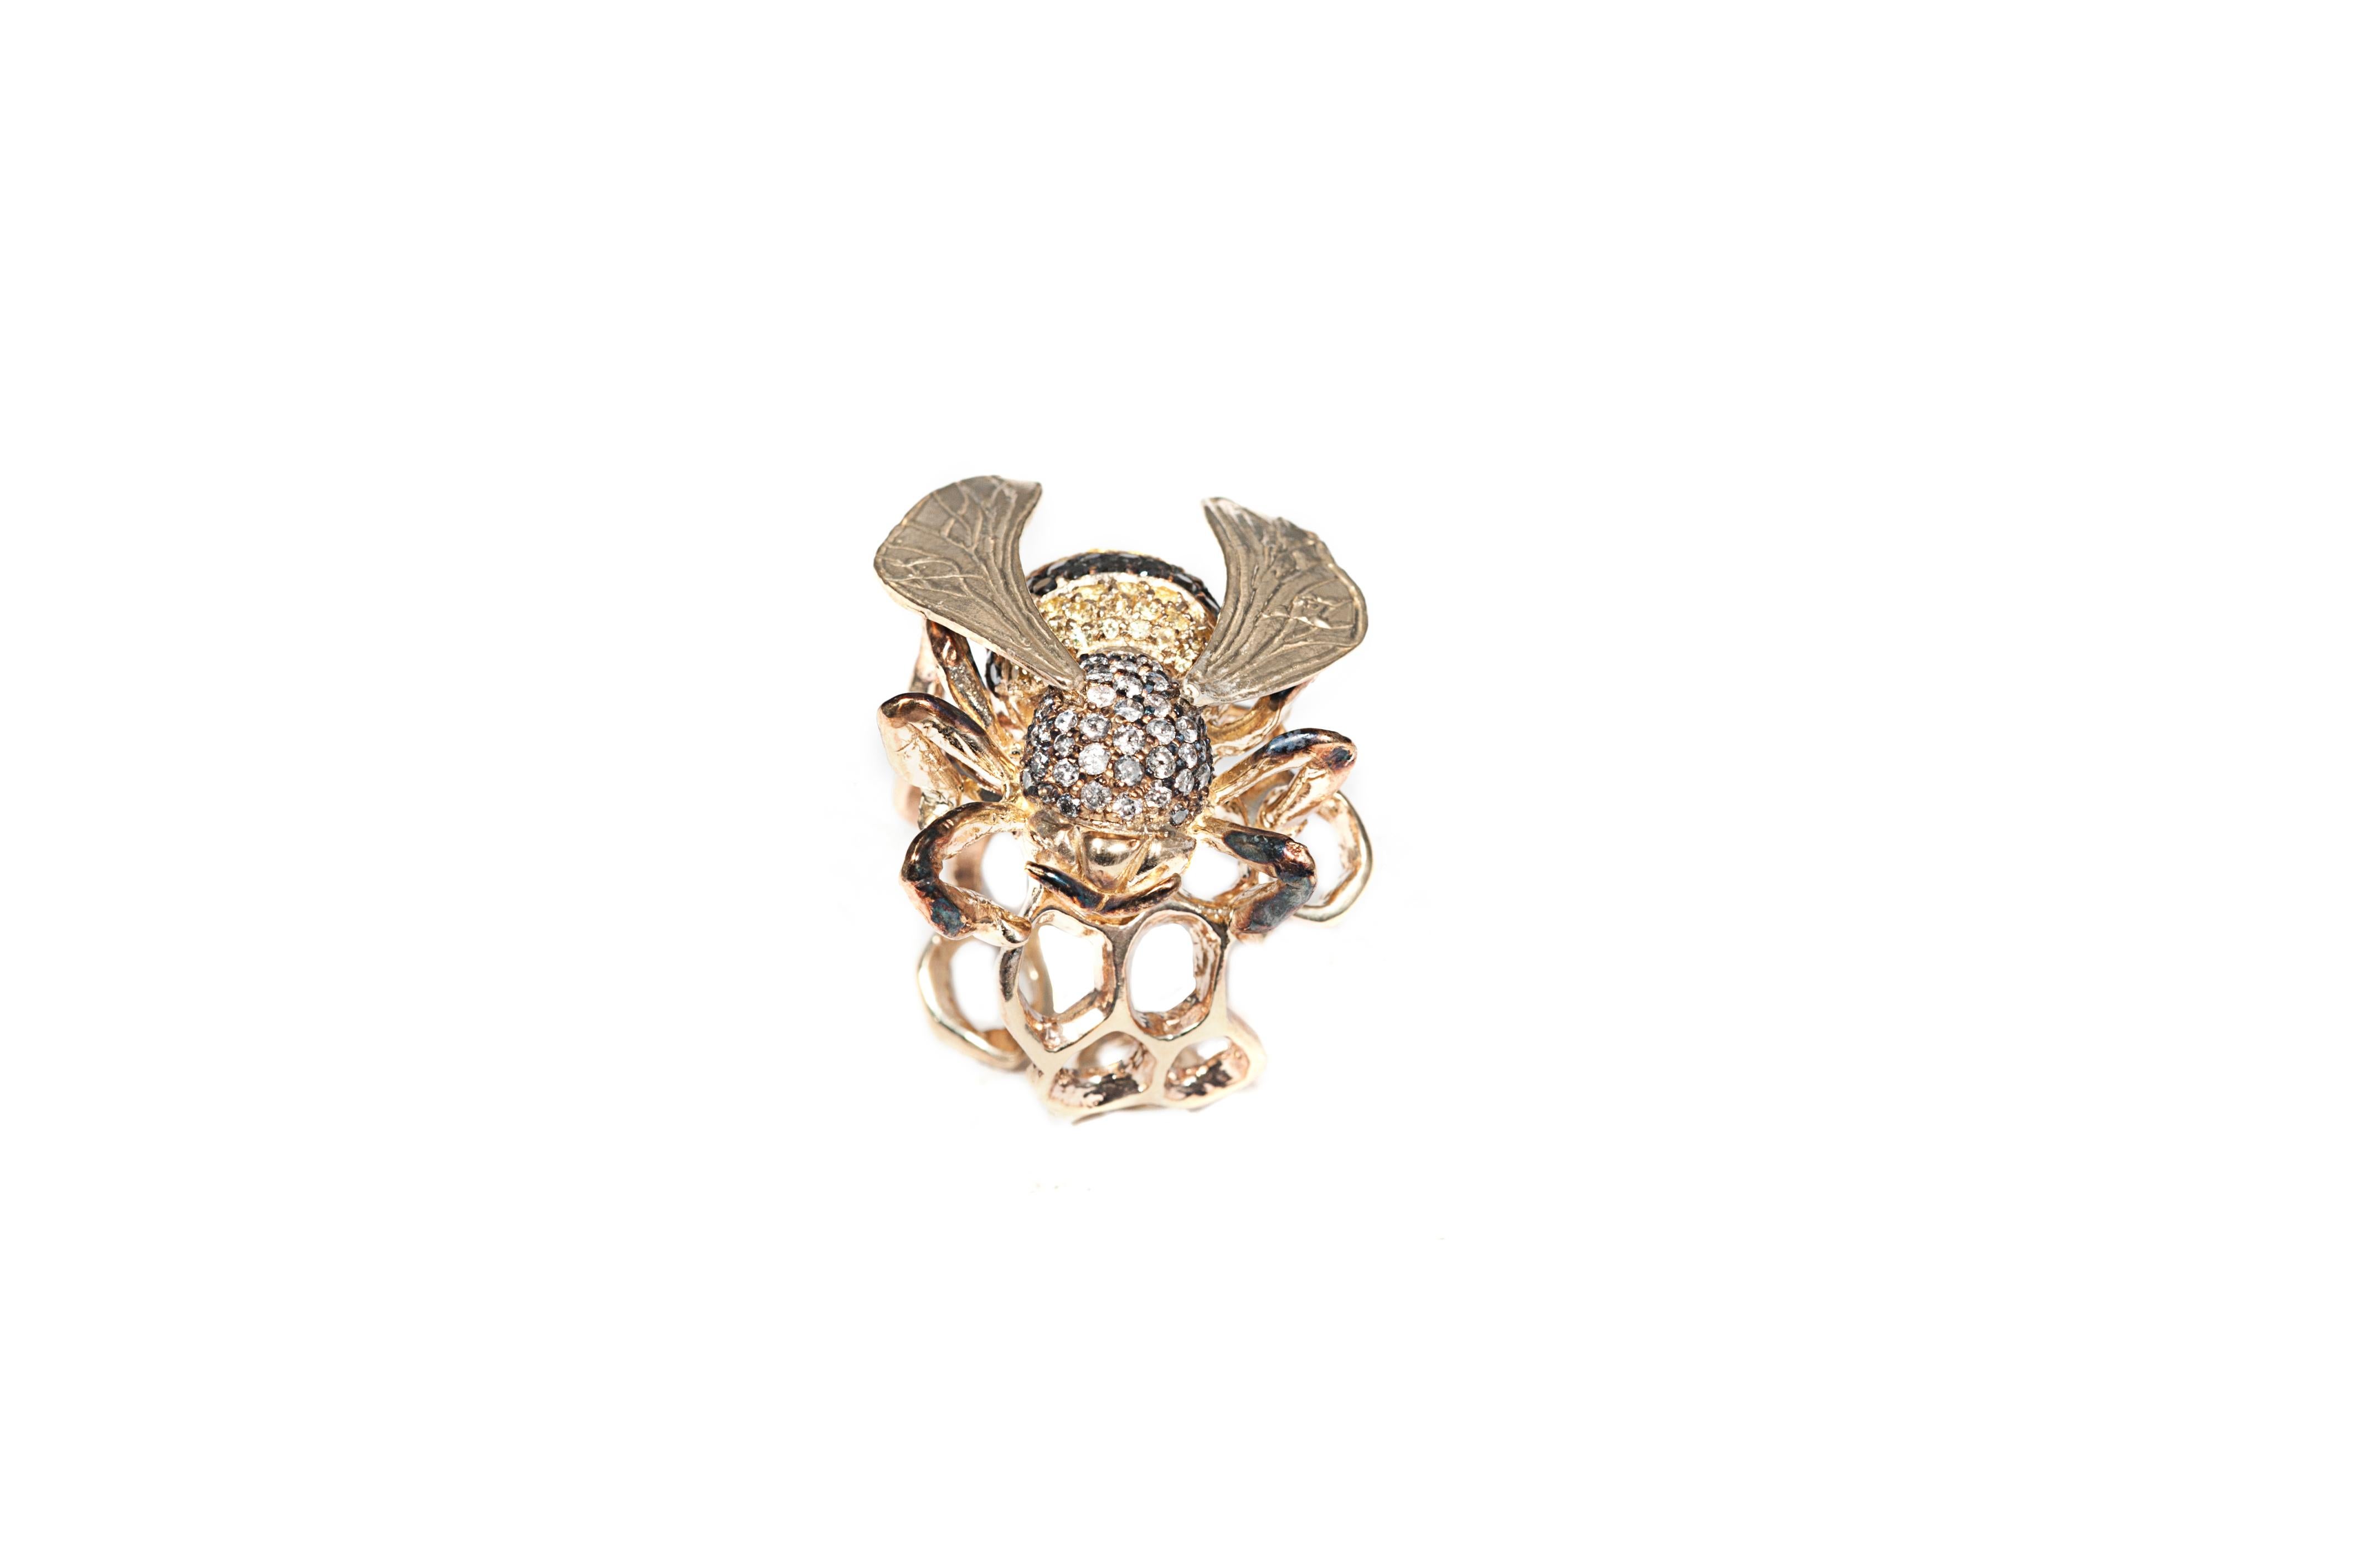 Gold bee ring, animalier style, composition: 
 
Gold 19,54 gr (9K)
60 yellow sapphires 2,10 ct
30 black diamonds 0,95 ct
52 grey diamonds 1,15 ct

Size is adjustable from 6 US to 7 1/4 US ( italian size from 12 to 15)
Other sizes on demand, working